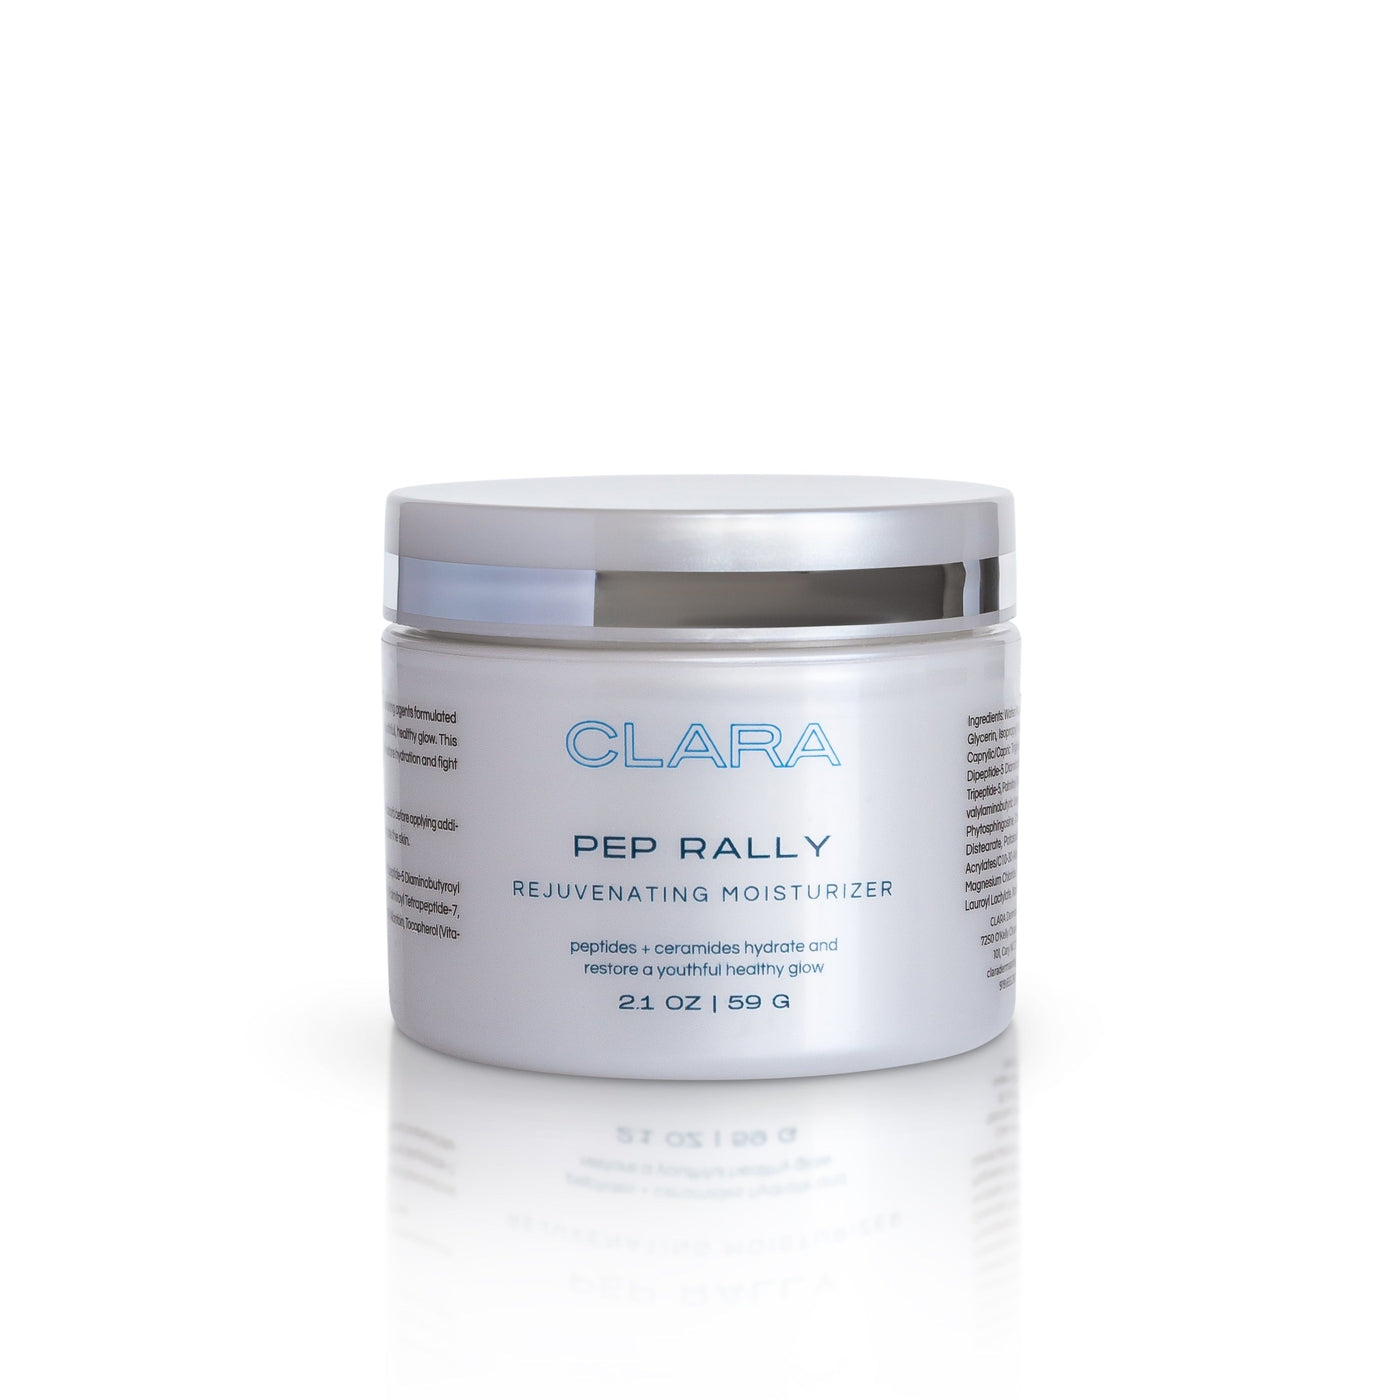 Pep Rally Moisturizer: This luxe moisturizer is rich in peptides, ceramides, and antioxidants to restore youthful, healthy skin. Sulfate and paraben free